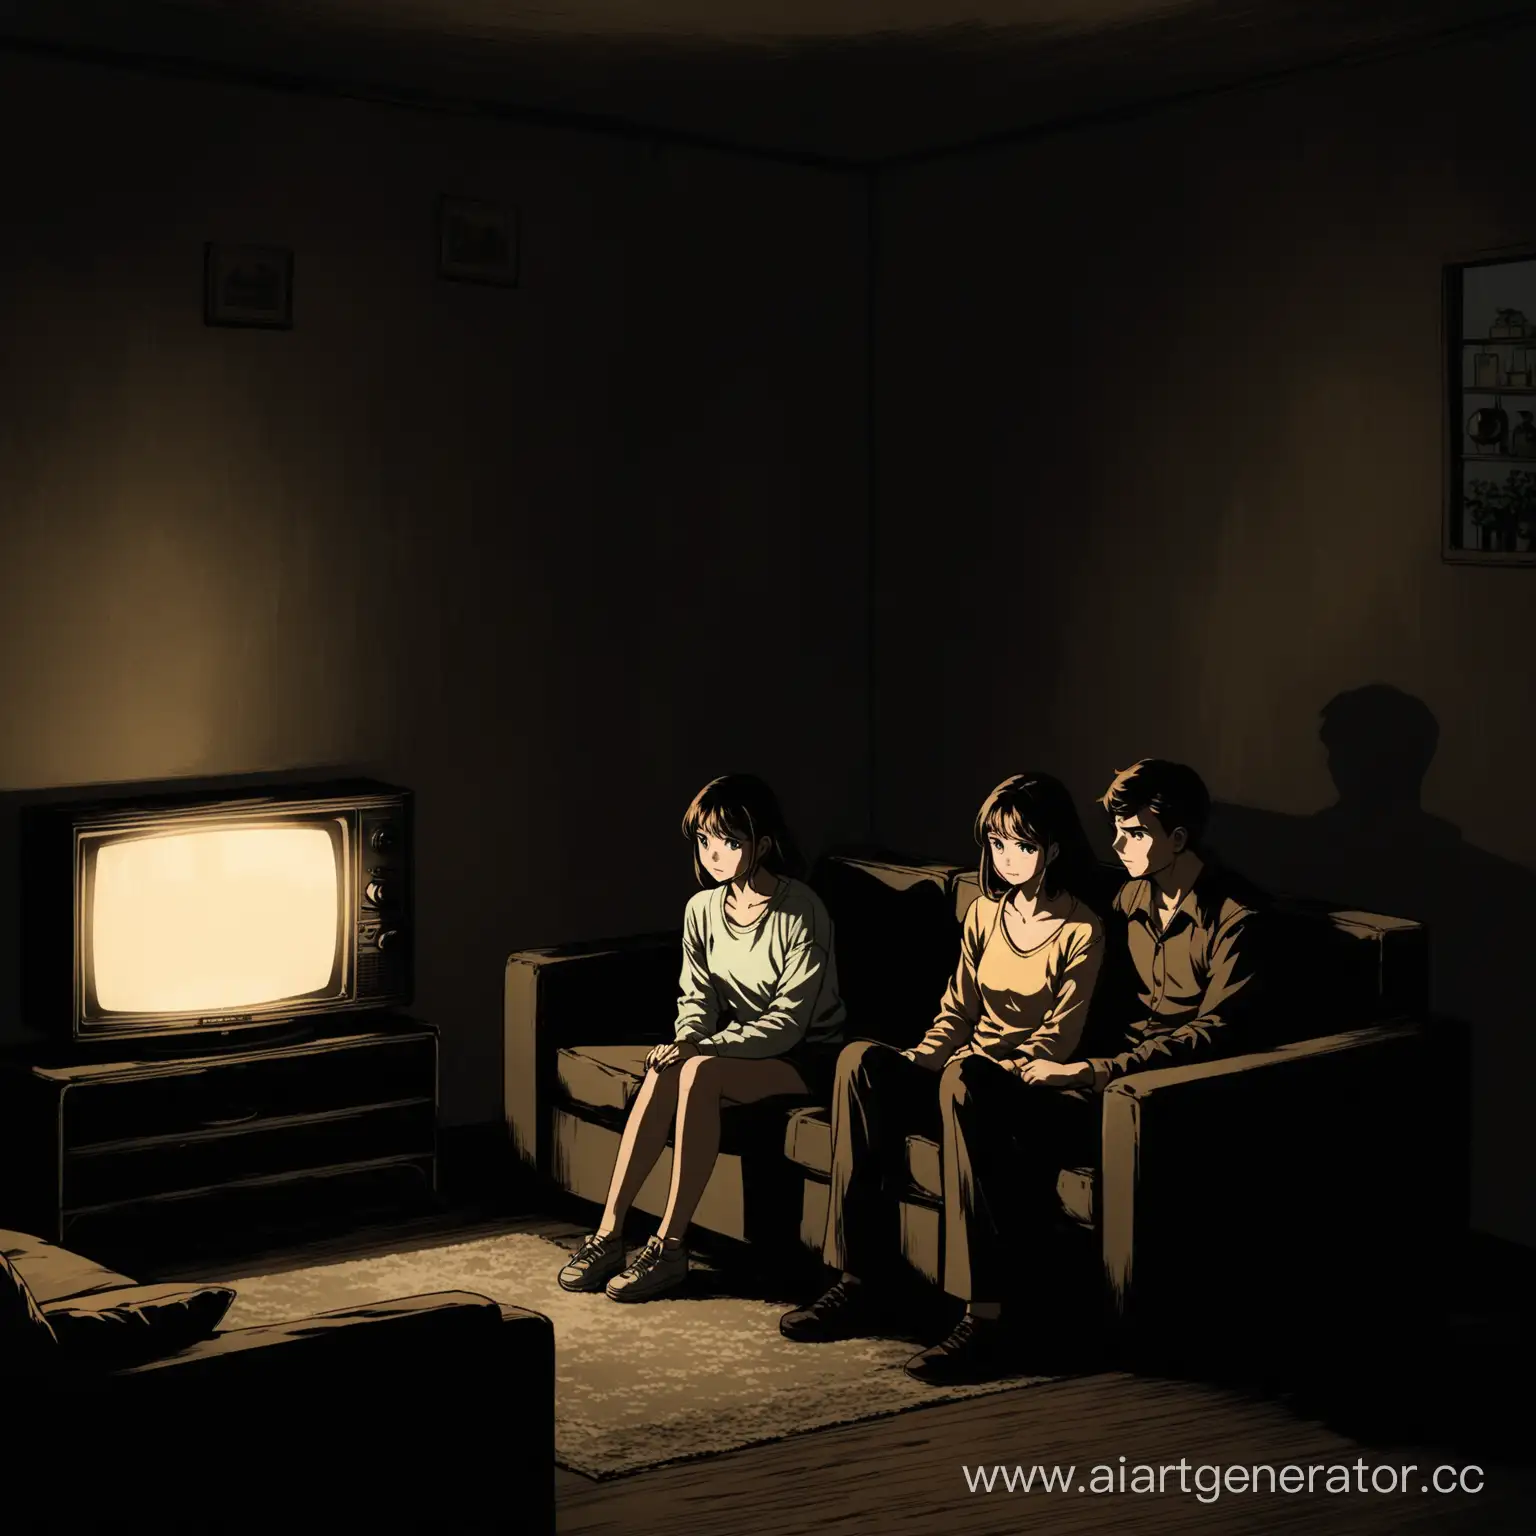 Young-Couple-Enjoying-Anime-on-Vintage-TV-in-SovietStyle-Apartment